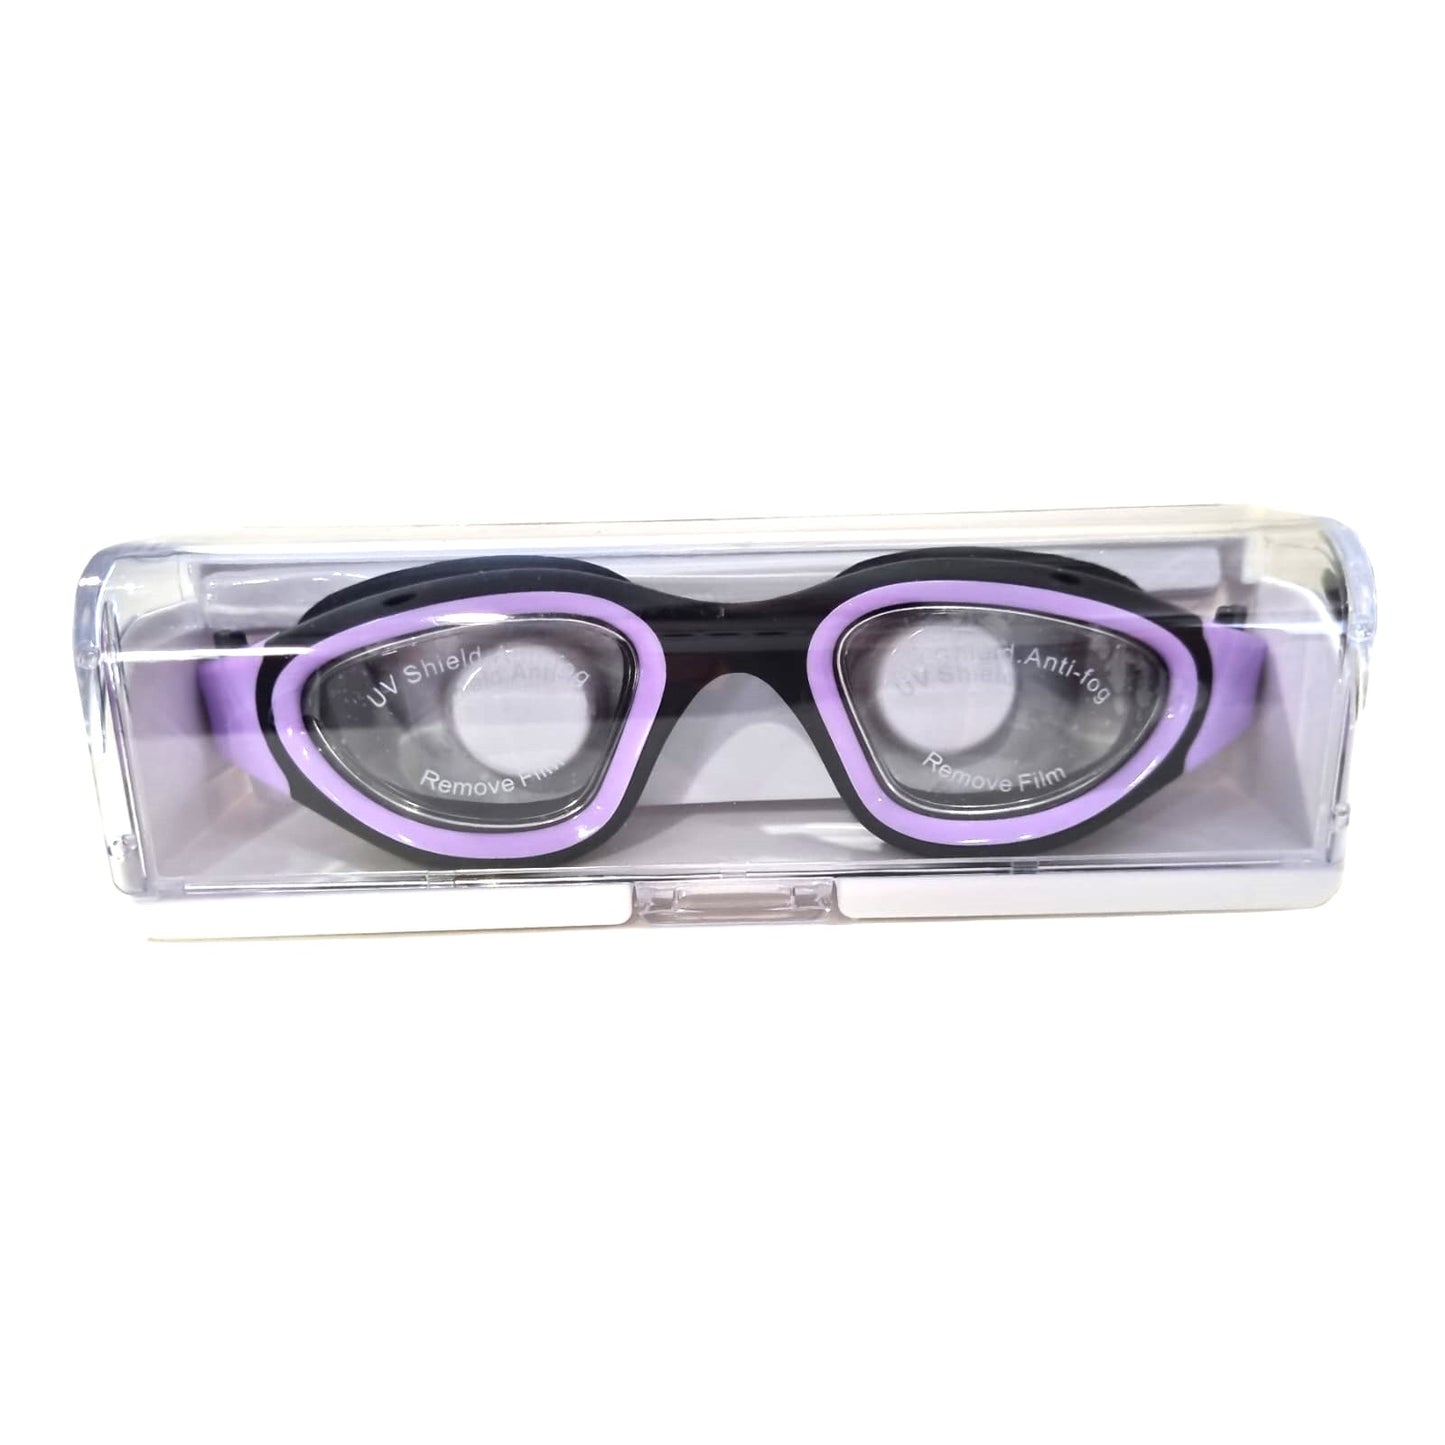 FLOWOLF FH1 Open Water Goggles - Purple/Blk Clear Lens